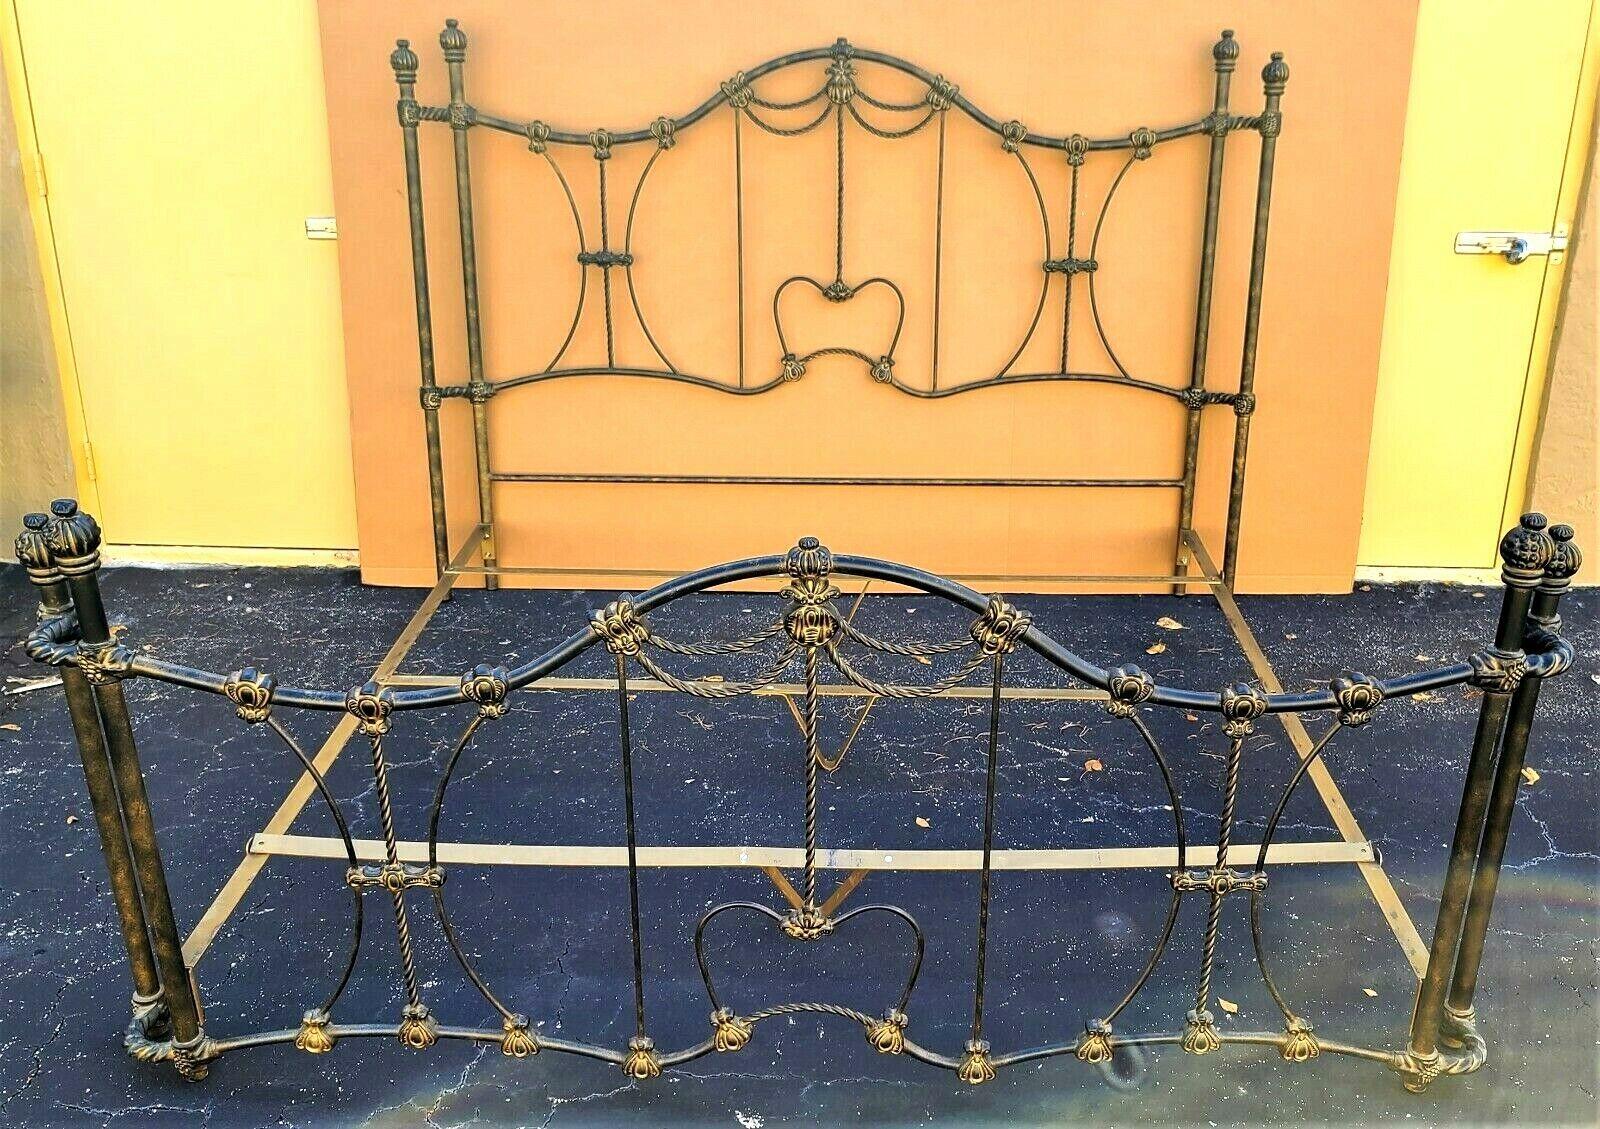 For FULL item description click on CONTINUE READING at the bottom of this page

Offering One Of Our Recent Palm Beach Estate Fine Furniture Acquisitions Of An 
A magnificent vintage ornate French style patinated iron/metal king size 8 post